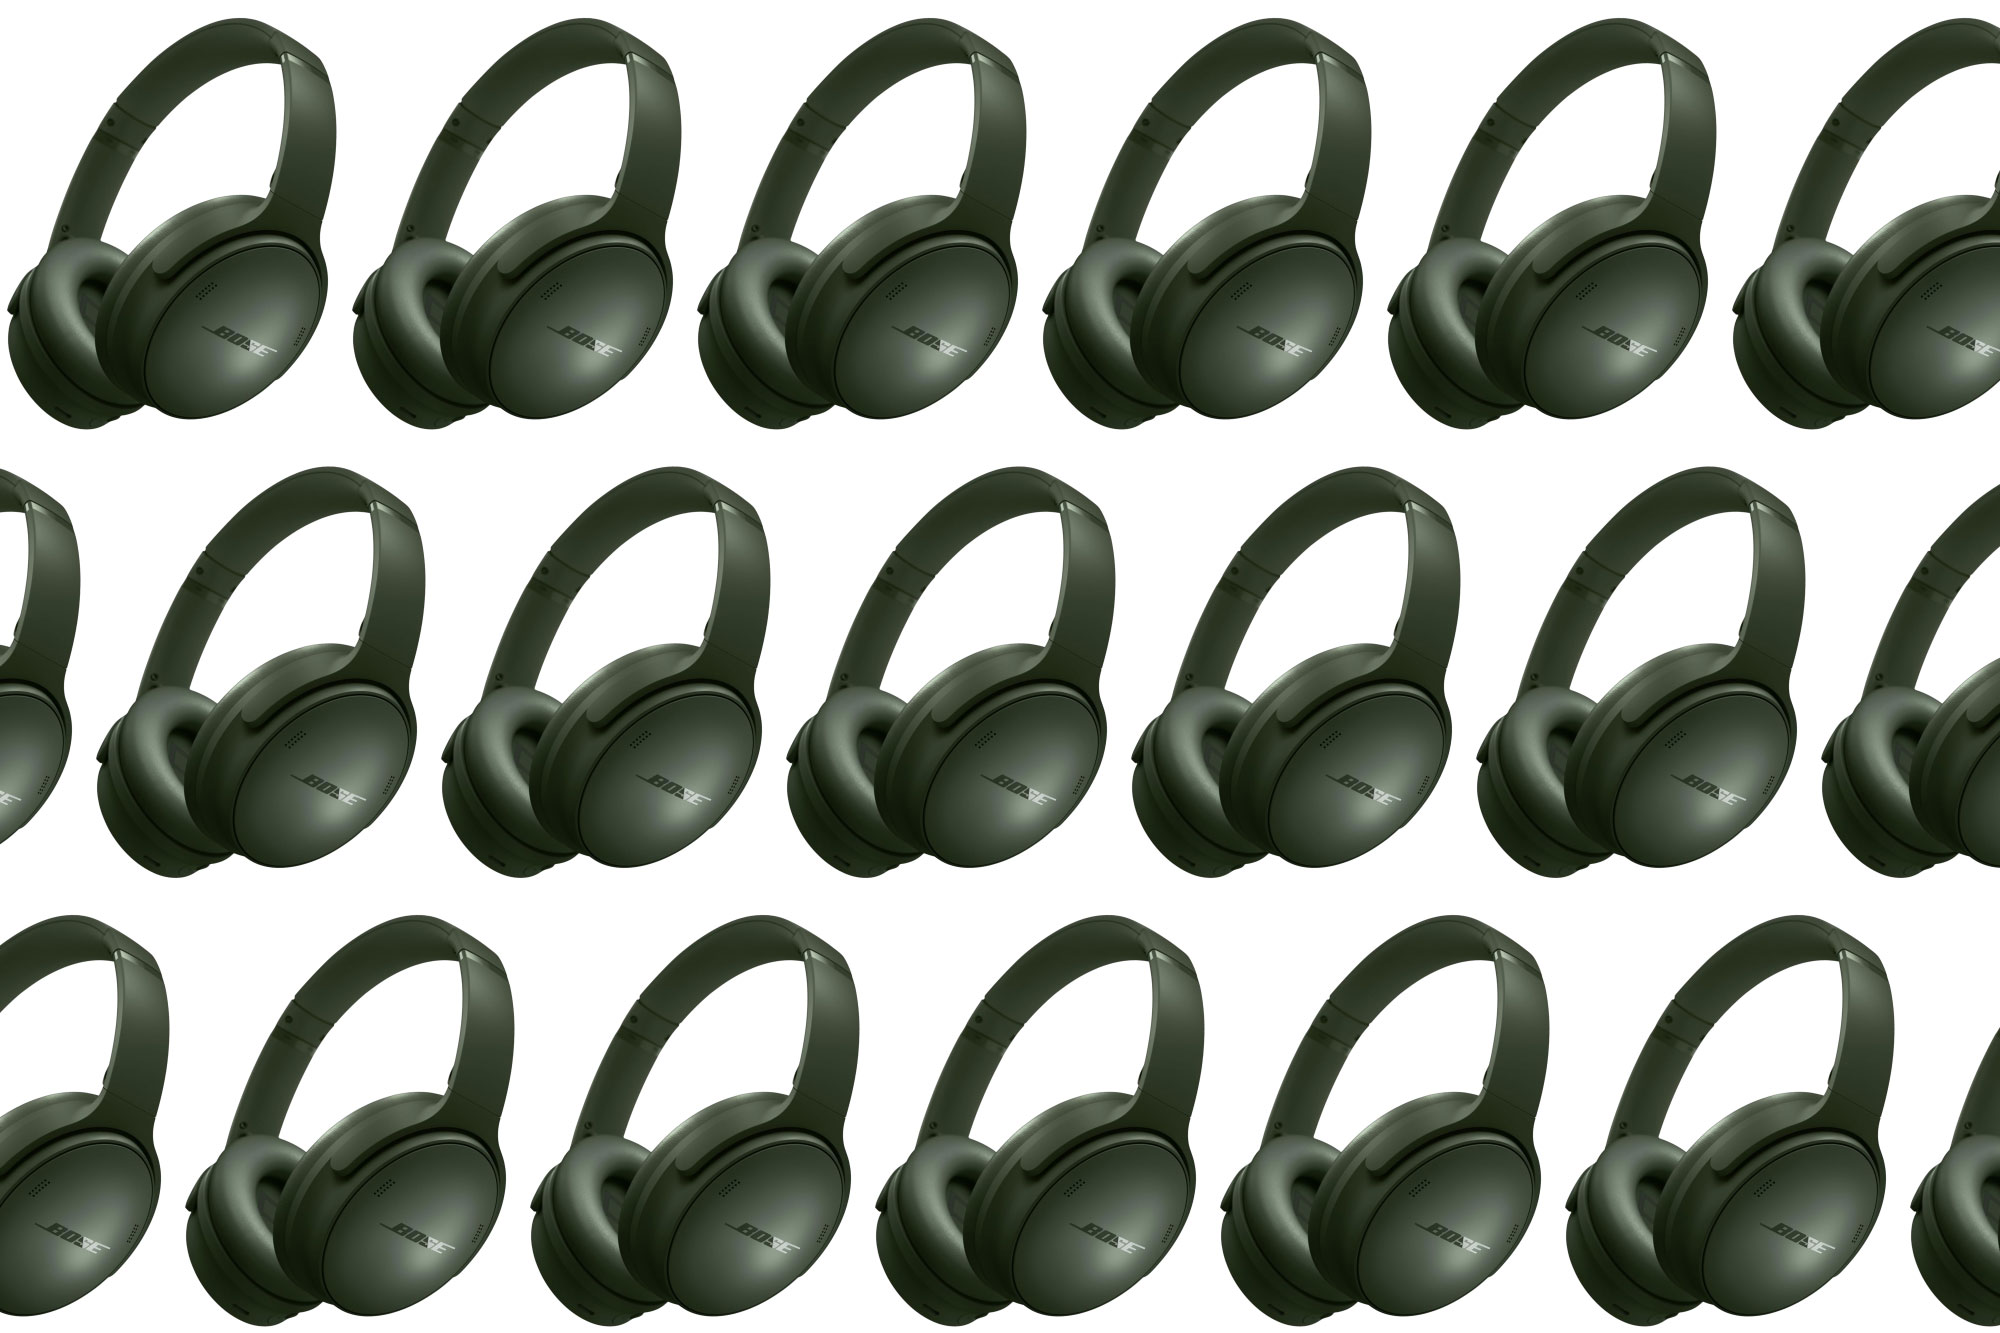 Give the gift of peace this holiday with Bose noise-canceling headphones for $100 off